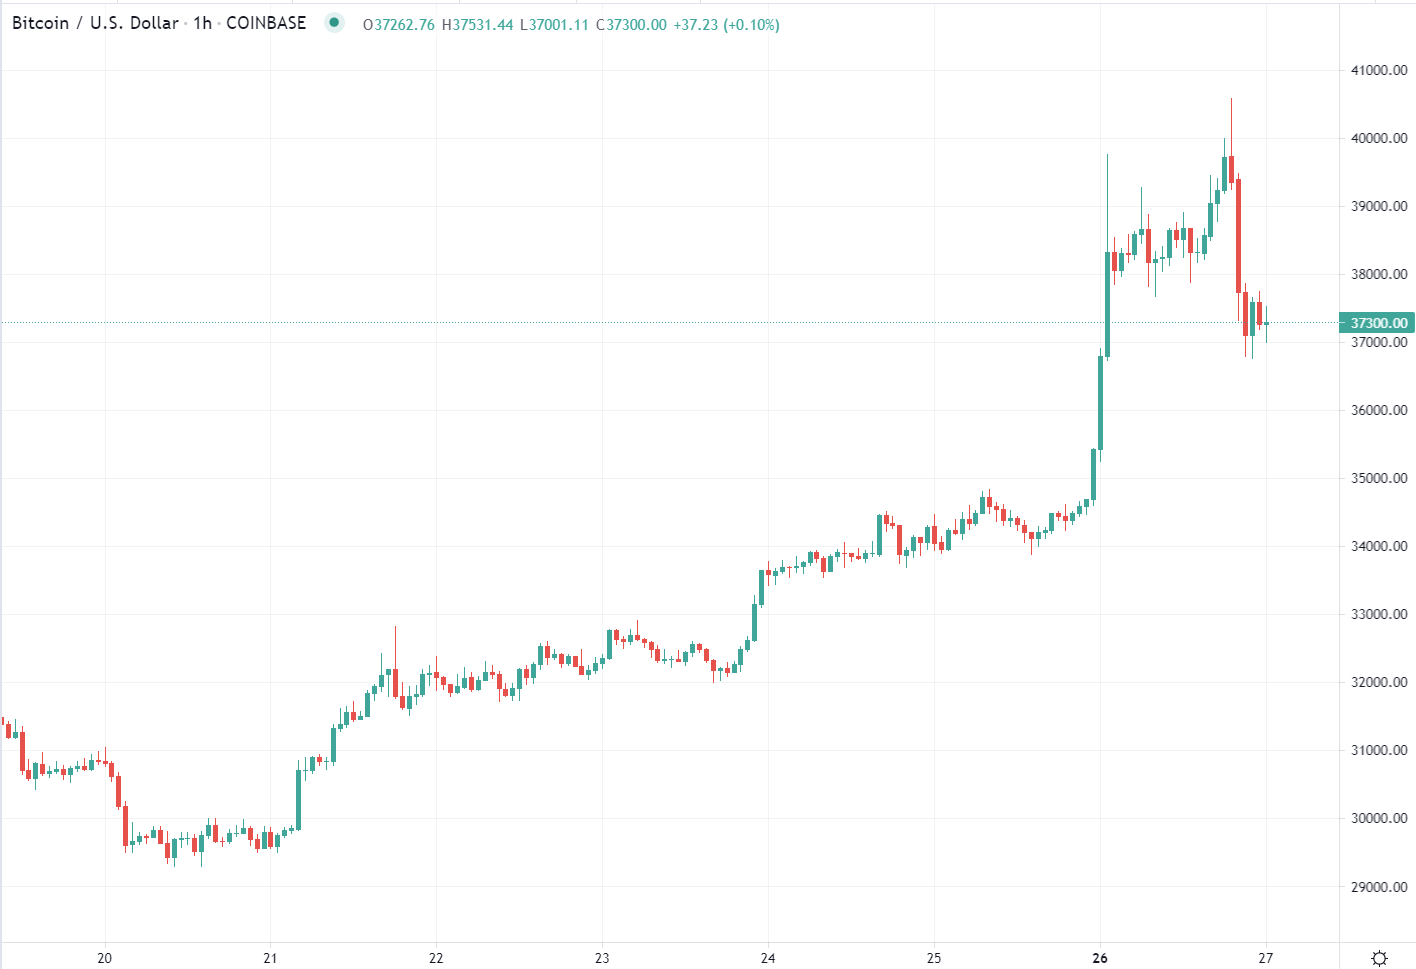 I posted the headlines here earlier, just prior to BTC getting the runs down to sub $37,000 before stabilising. 